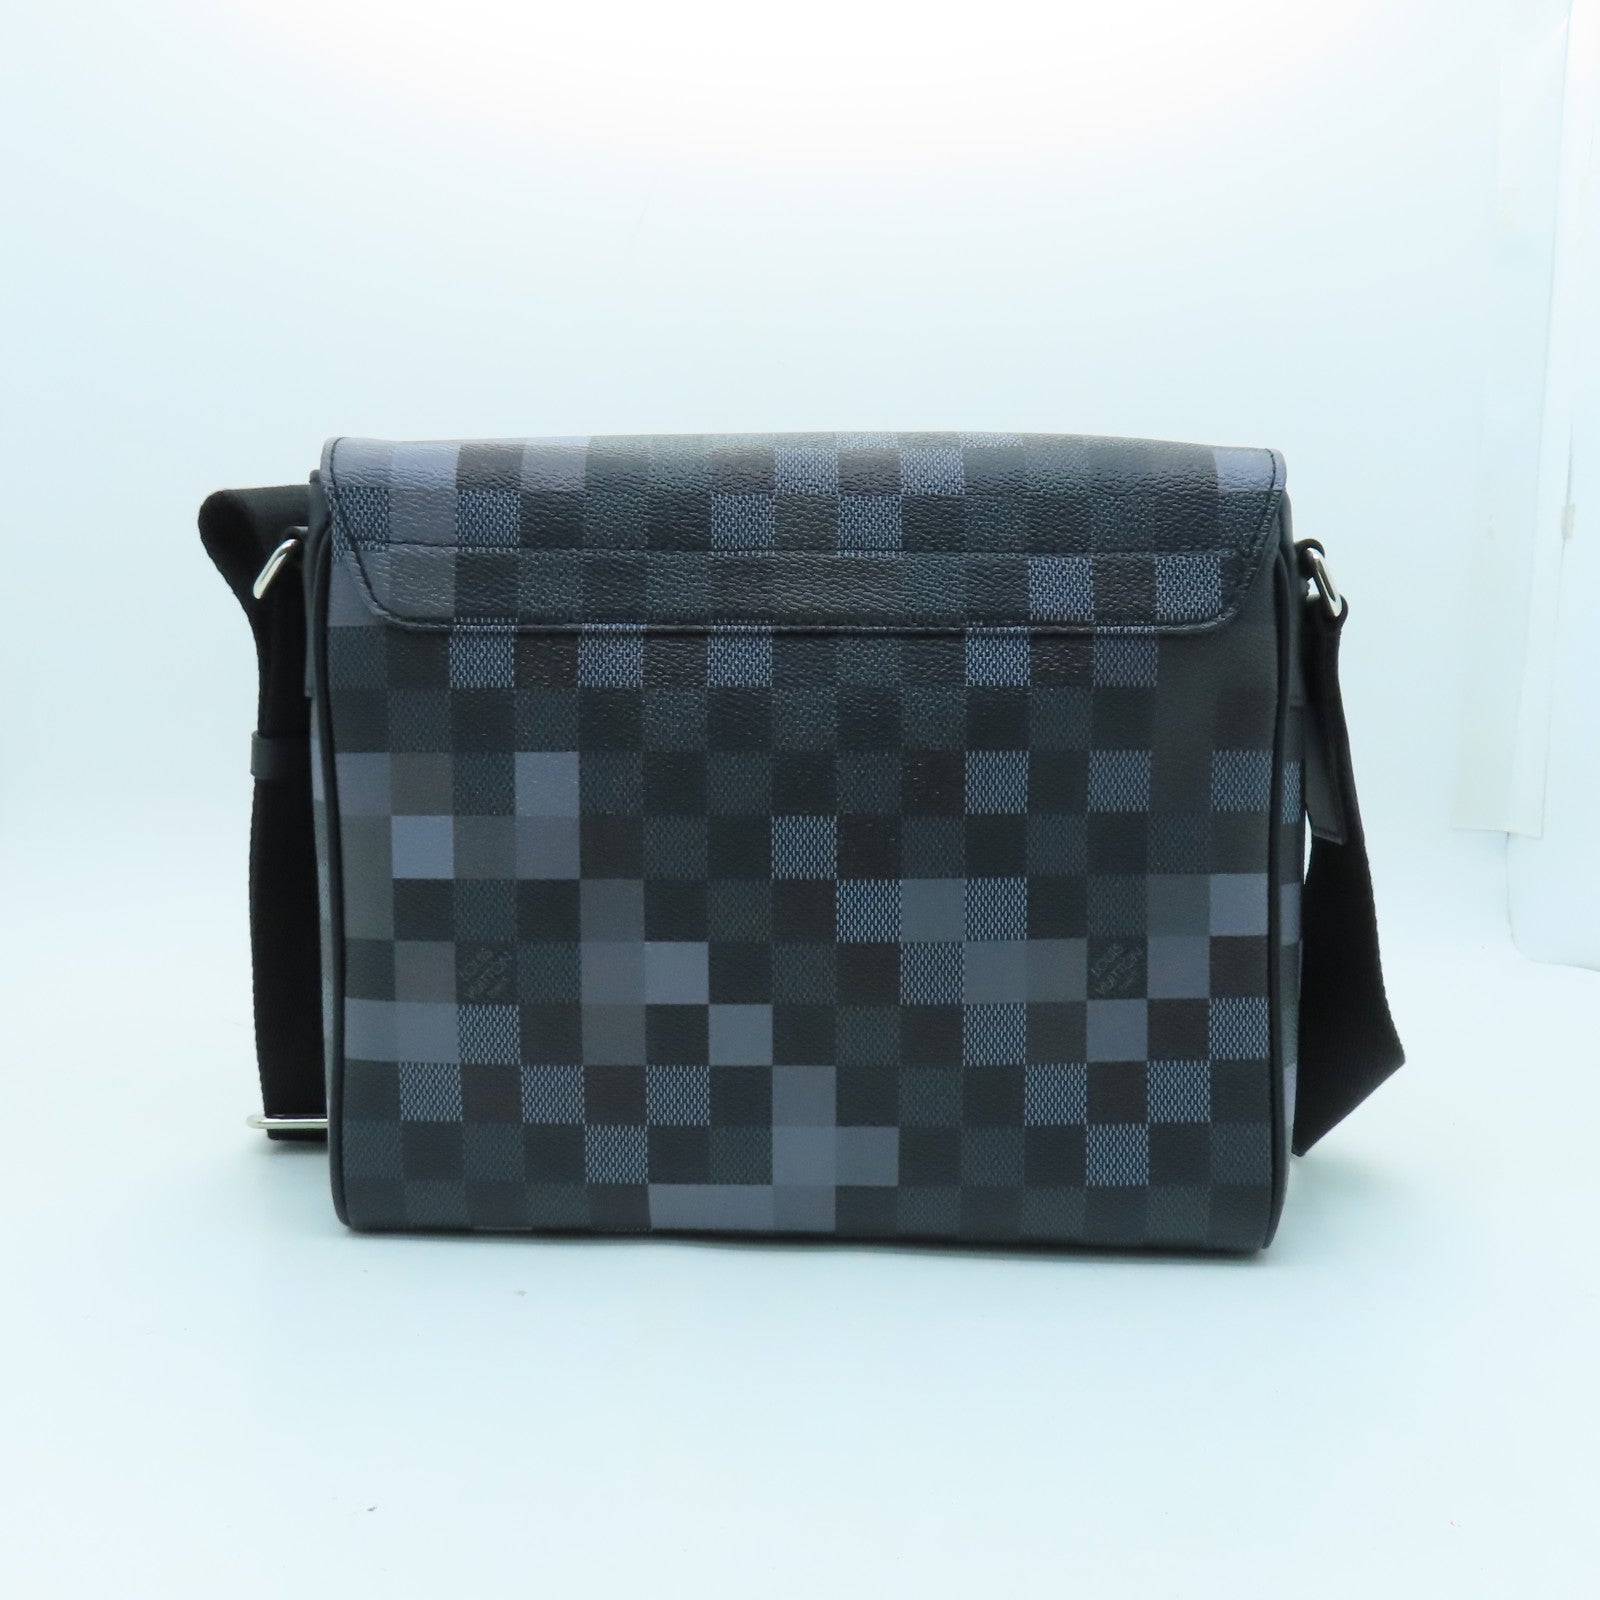 Louis Vuitton District PM Damier Graphite Pixel Gray in Coated